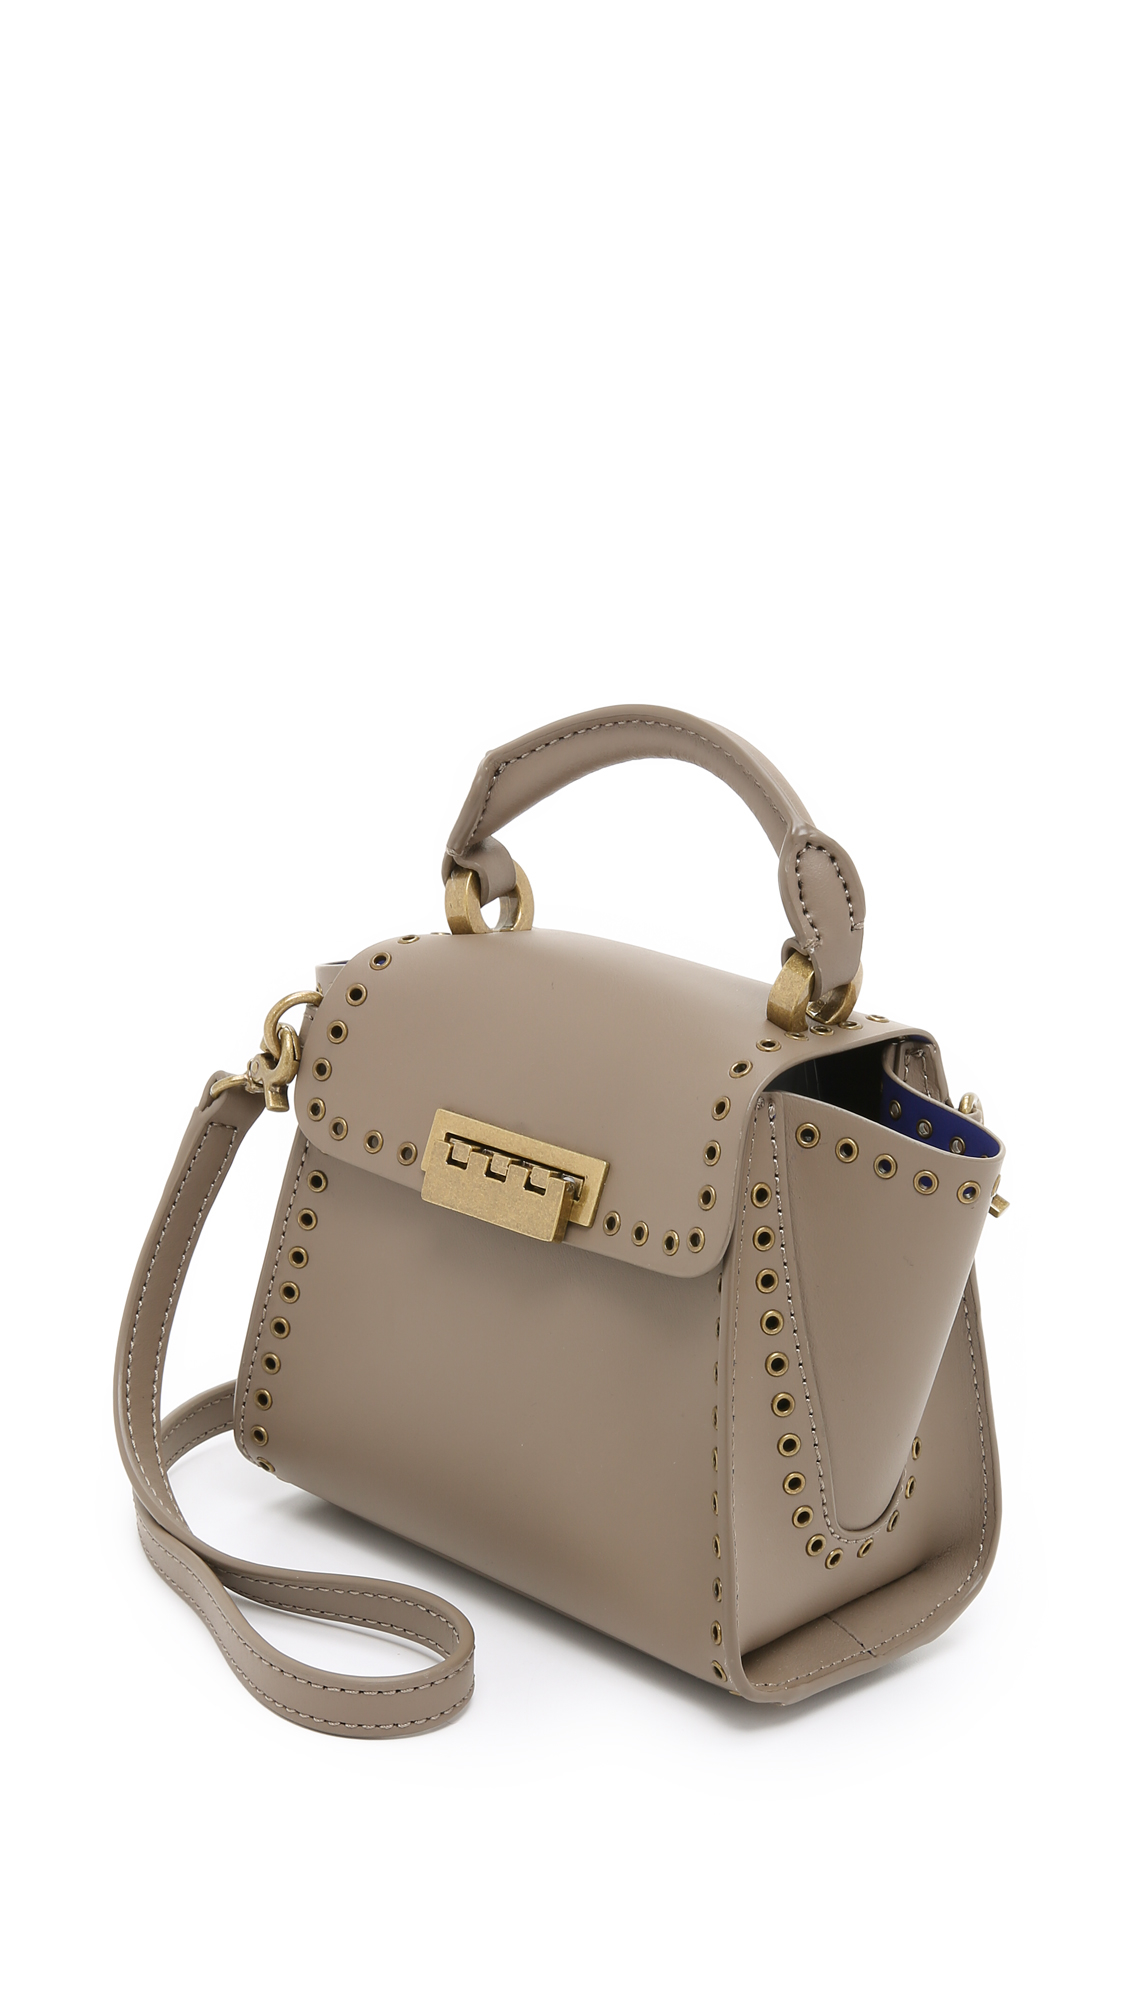 Zac Zac Posen Eartha Iridescent Mini Top Handle Bag, Keep Your Hands Free  This Spring With These 100 Cute and Functional Crossbody Bags